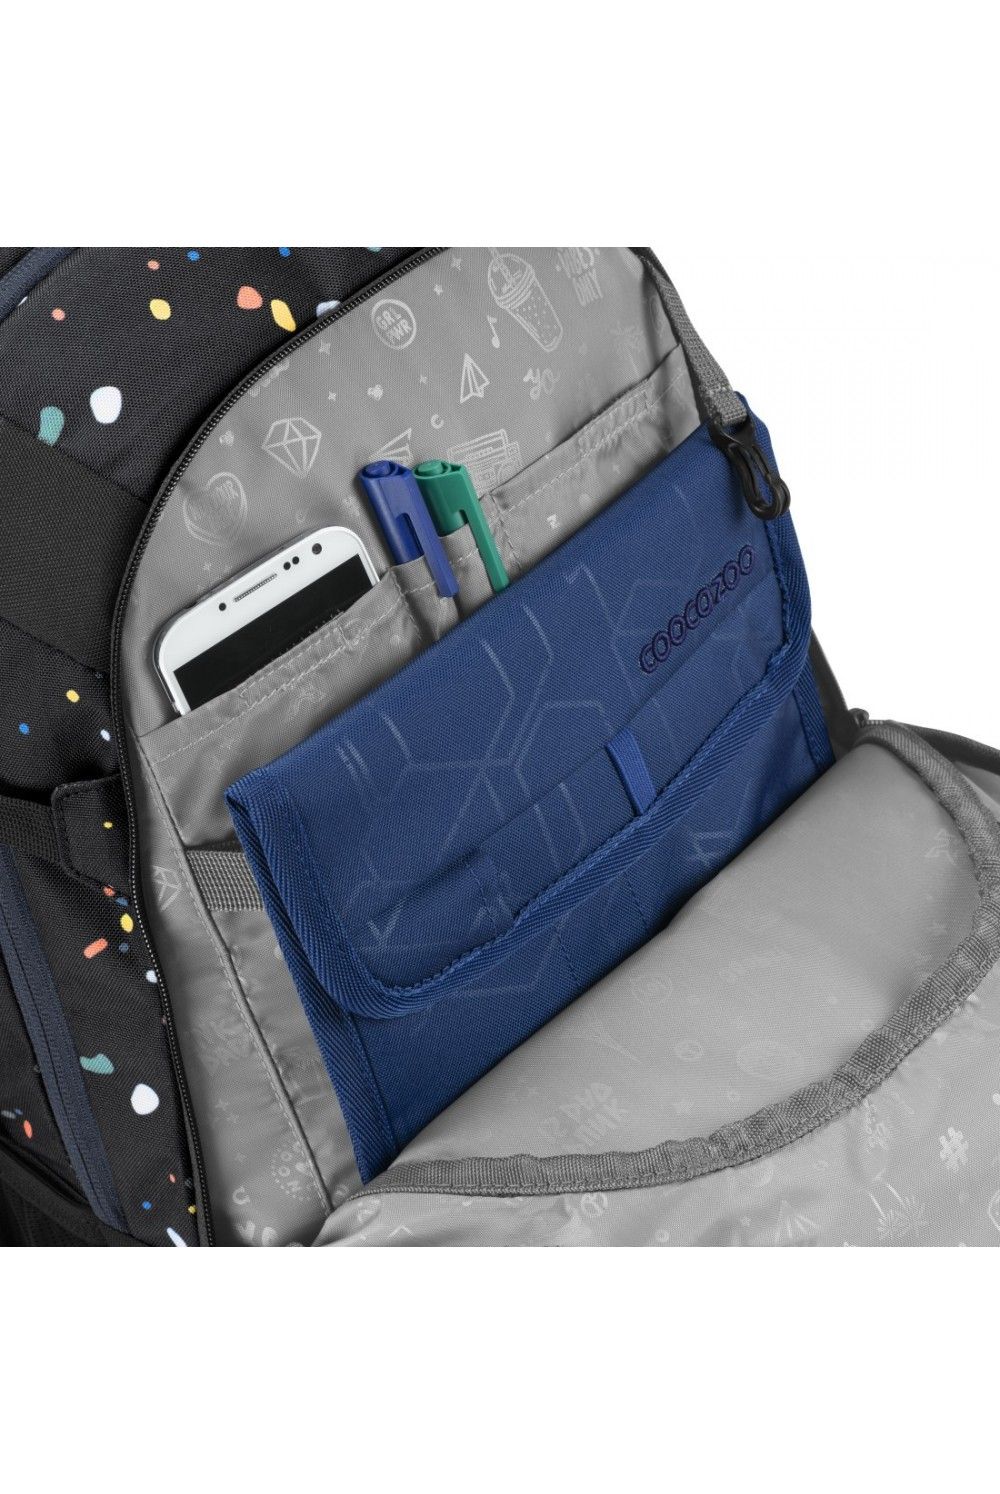 Schulrucksack Coocazoo MATE Sprinkled Candy